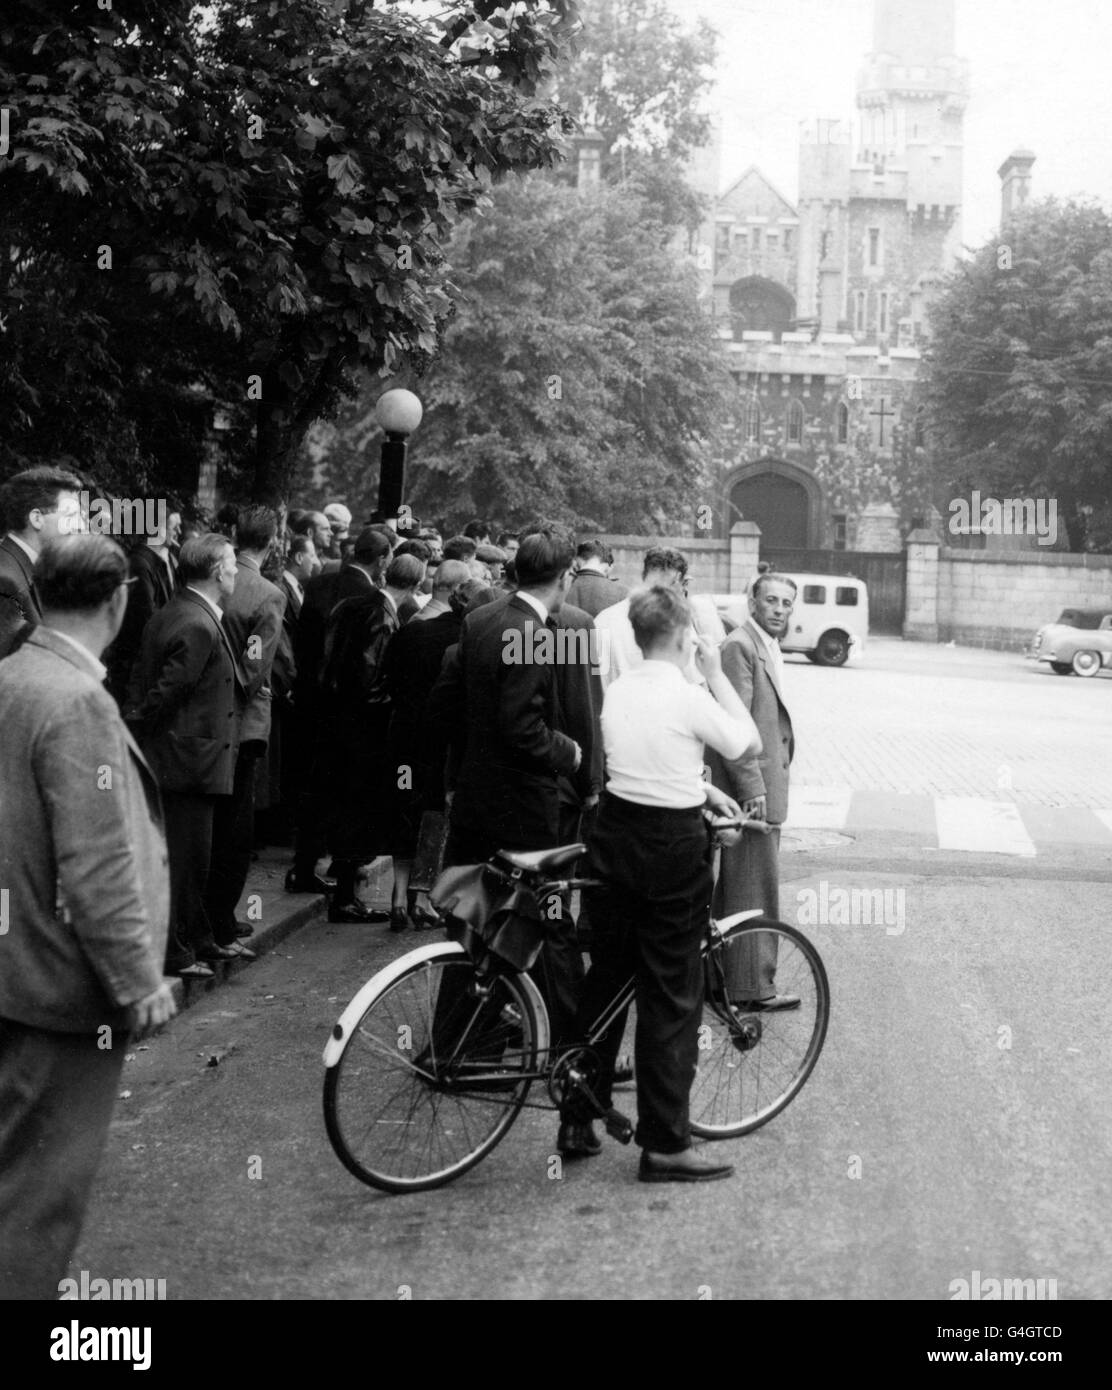 The crowd at the gates of Holloway Prison, London, as Ruth Ellis is executed for the murder of her lover, racing motorist David Blakely. She was the last woman to be hanged in Britain. Stock Photo